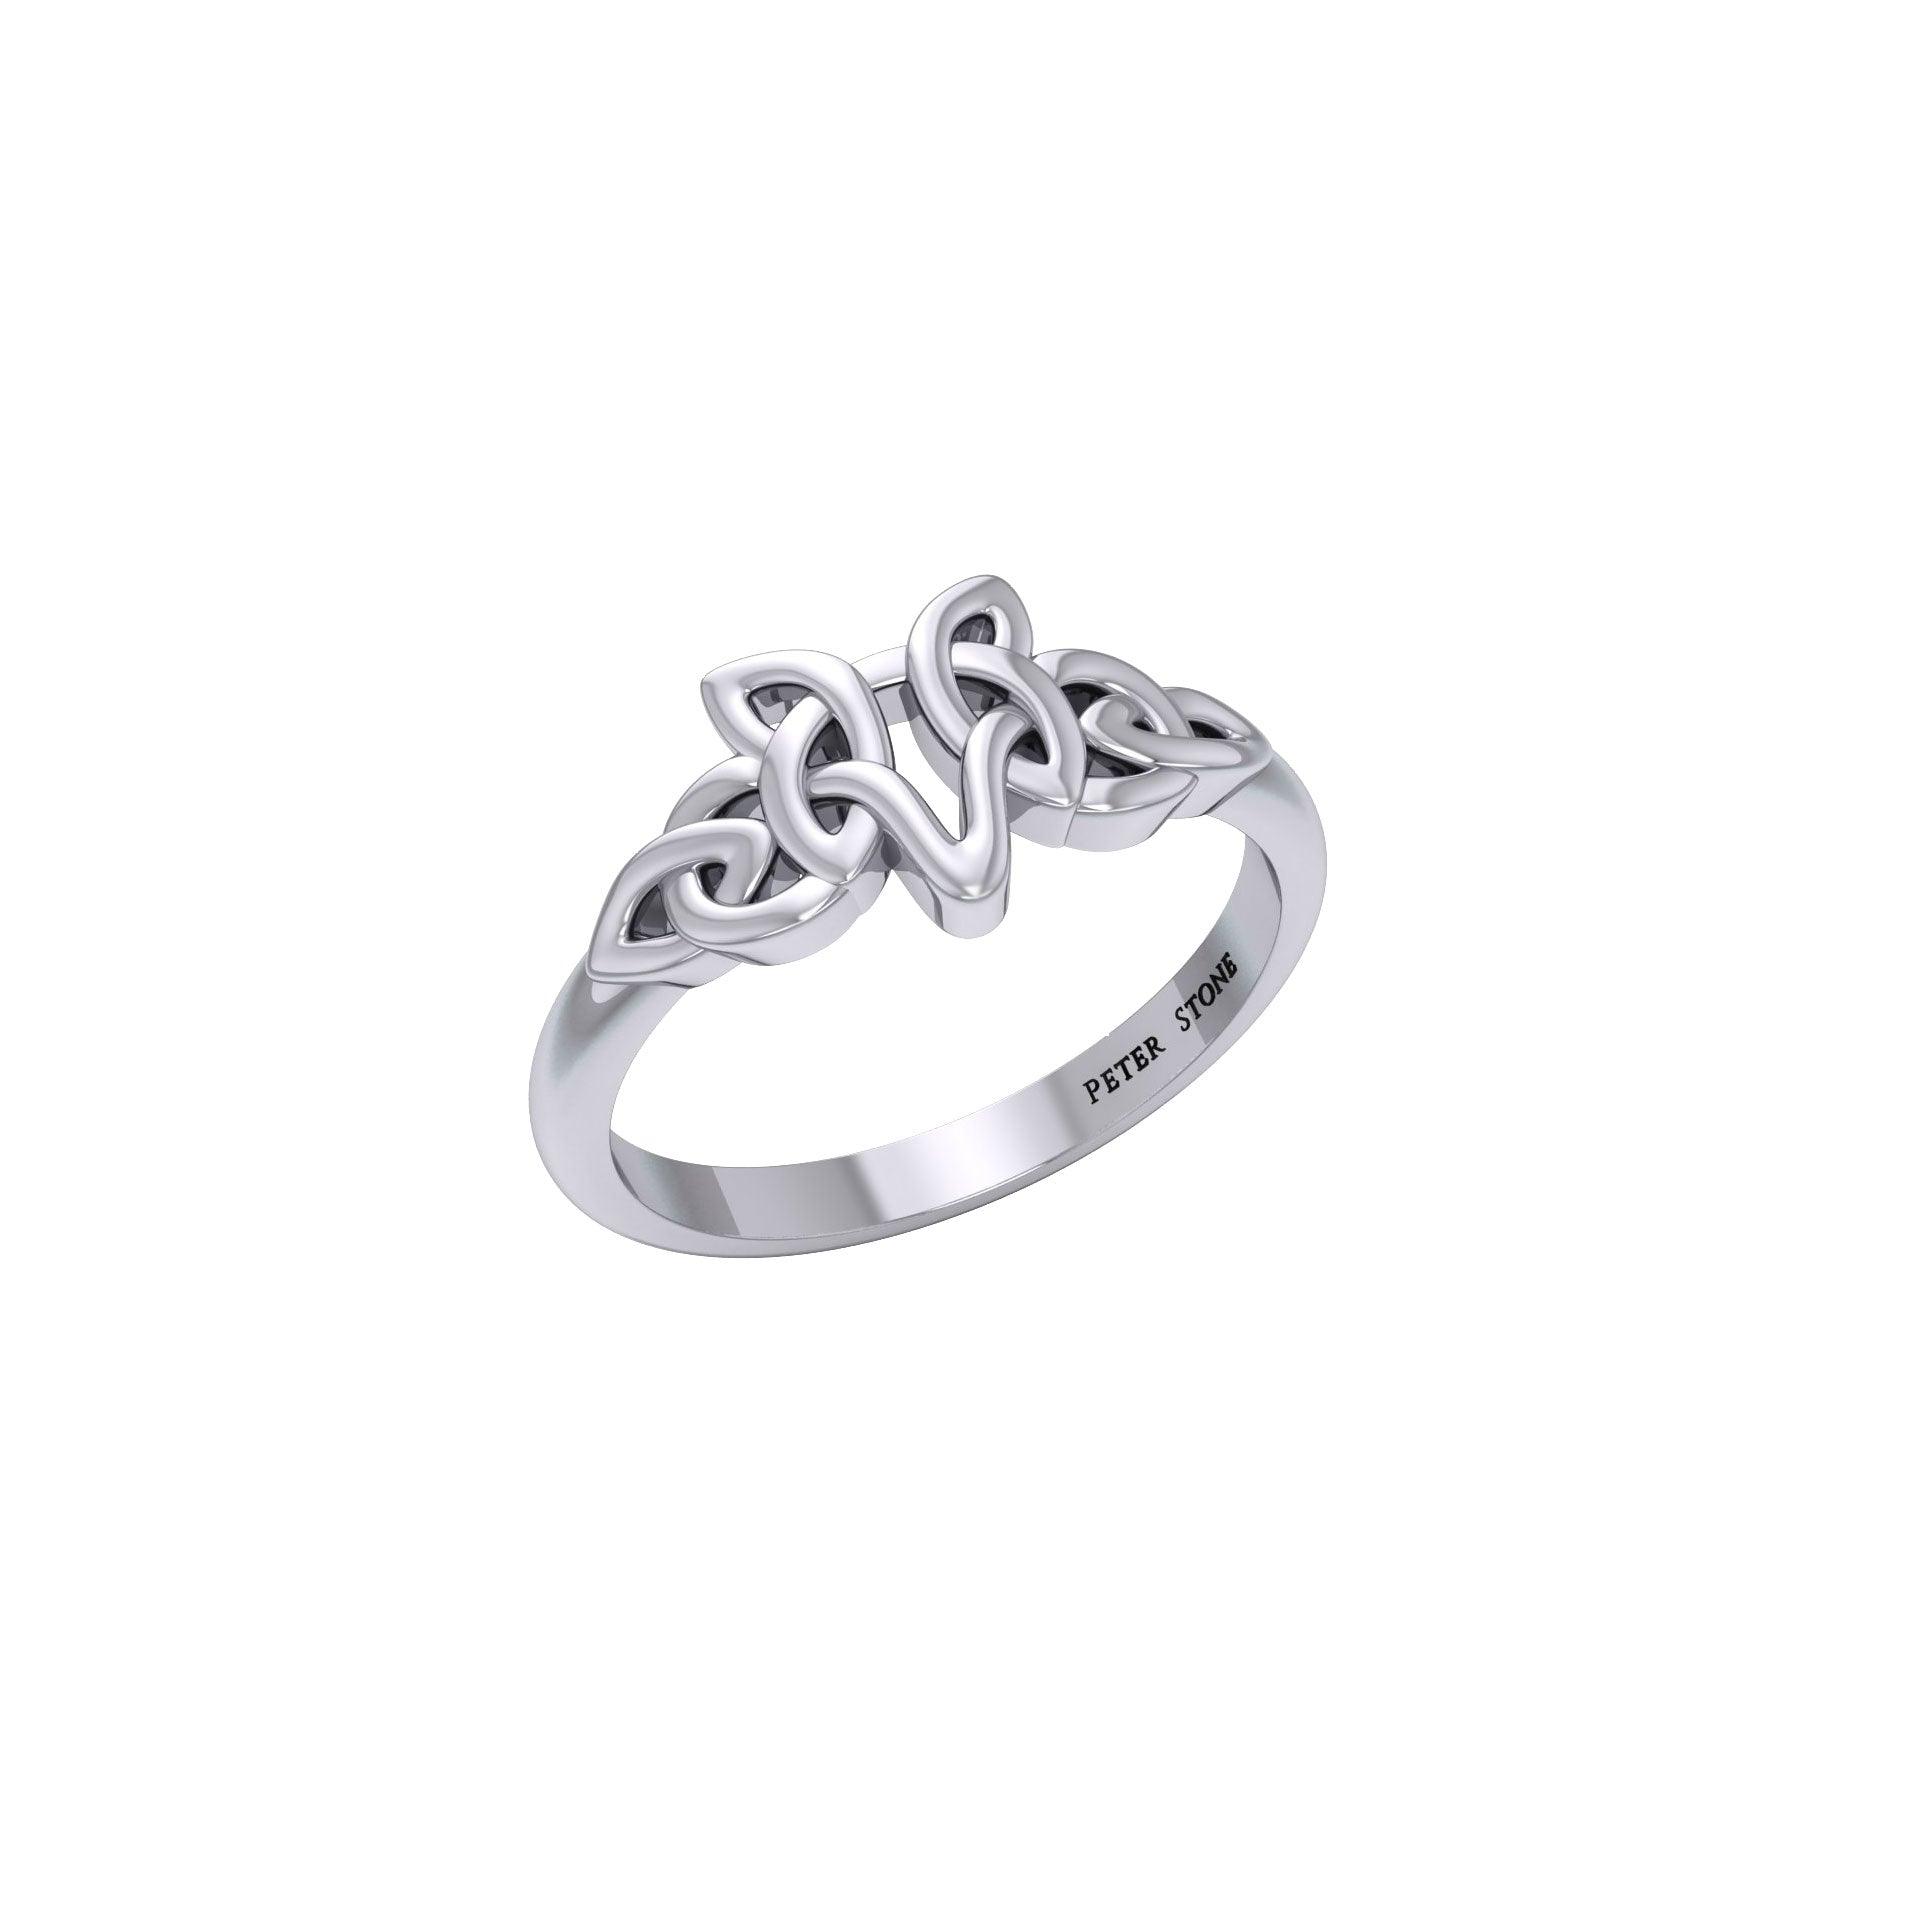 Peter Stone Jewelry Sterling Silver Celtic Wolf Ring - Majestic Symbolism and Craftsmanship for a Bold Statement TRI2419 - peterstone.dropshipping